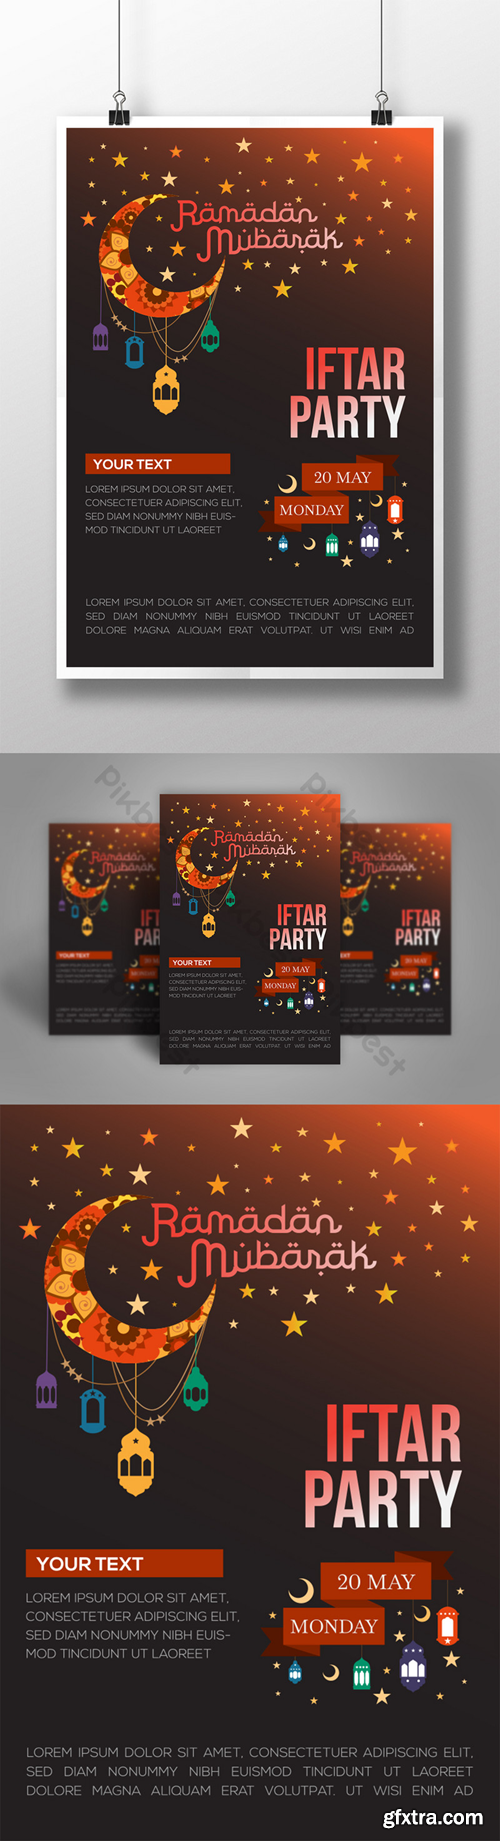 Ramadan Iftar Party Invitation Poster Design For Relatives Template AI